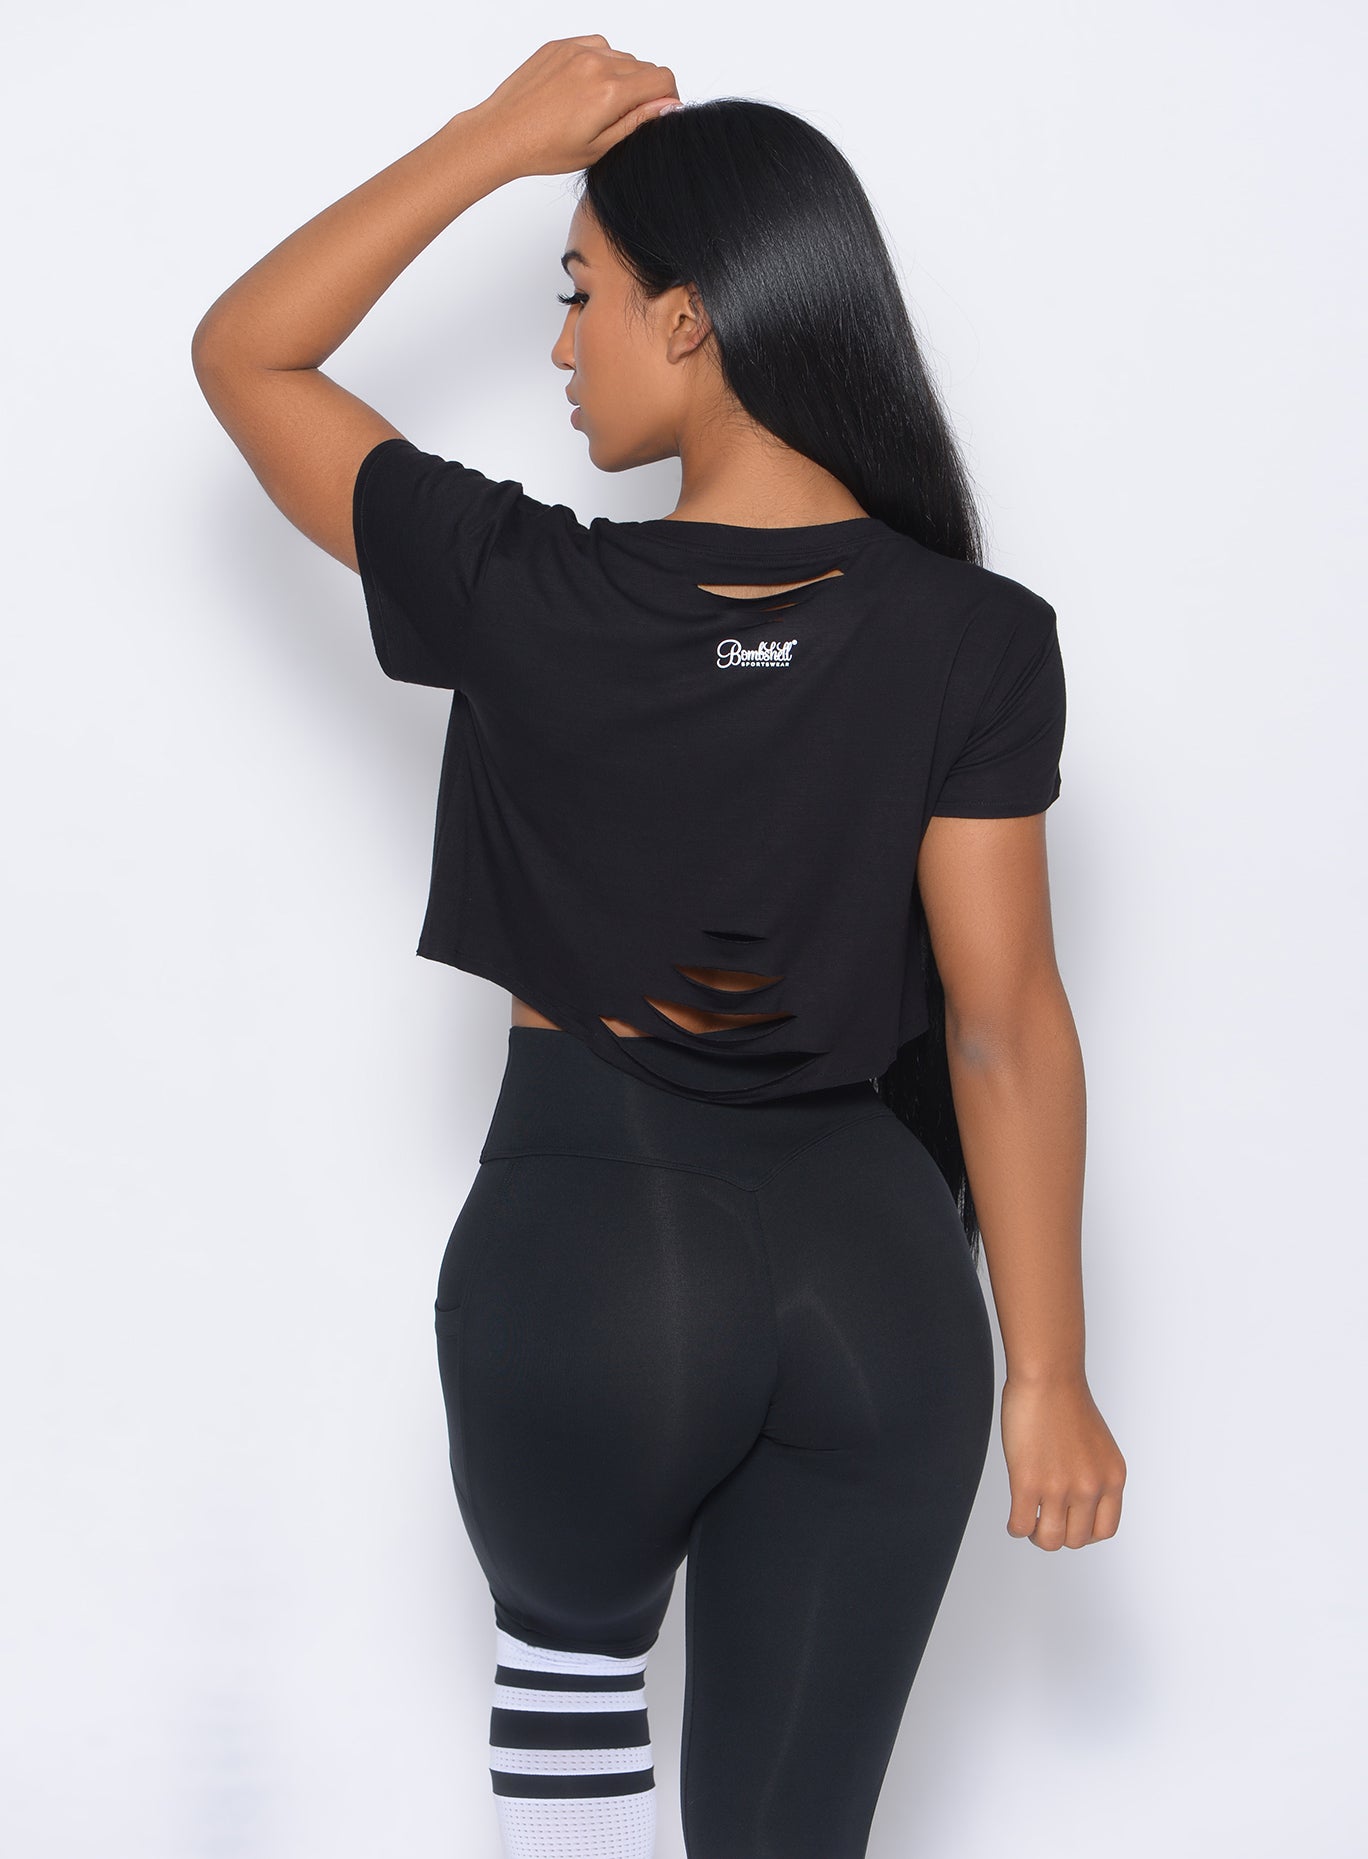 Back view of the model with her left hand over her head in our black shredded tee and a matching leggings